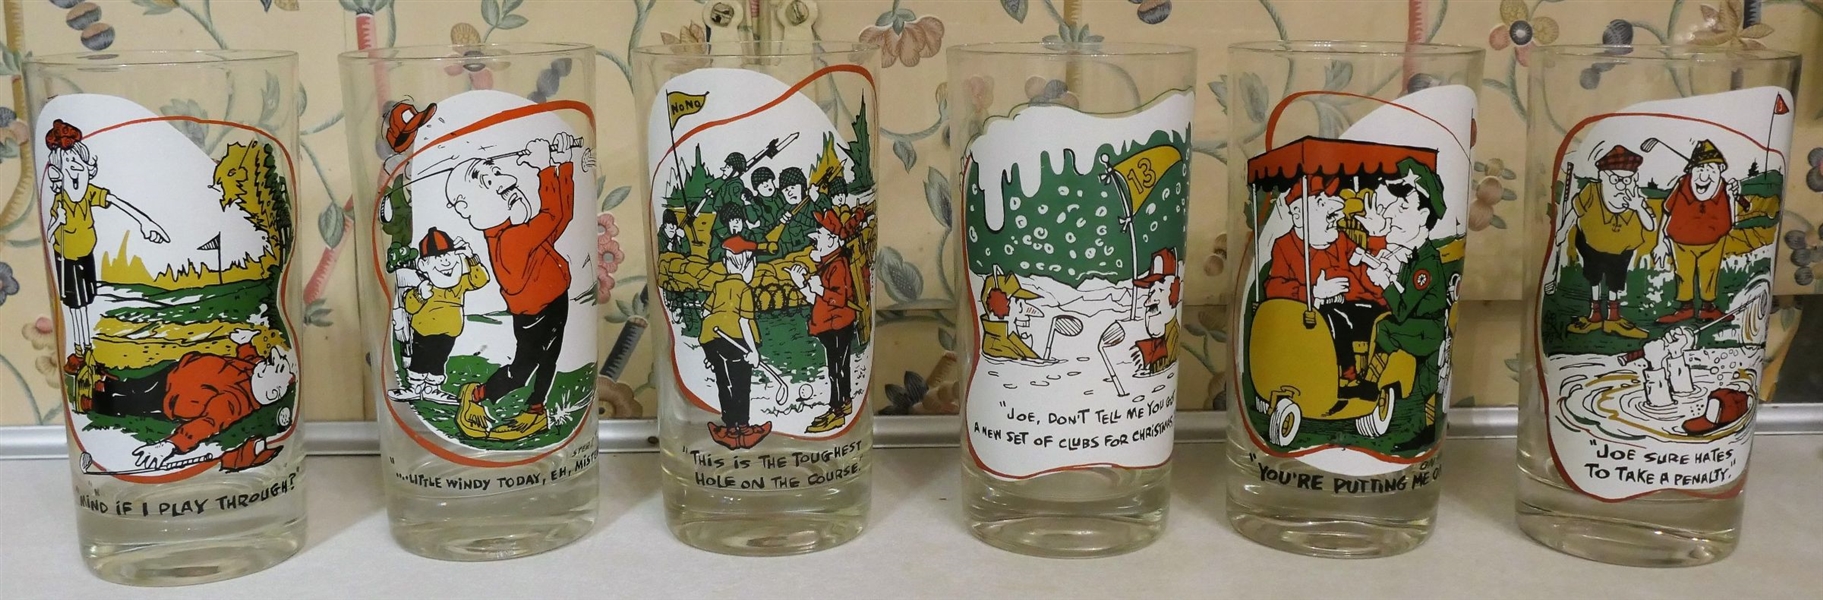 6 - Tee Haws - Golfing Tumblers - Different Scenes on Each Glass - Measuring 5 3/4" Tall